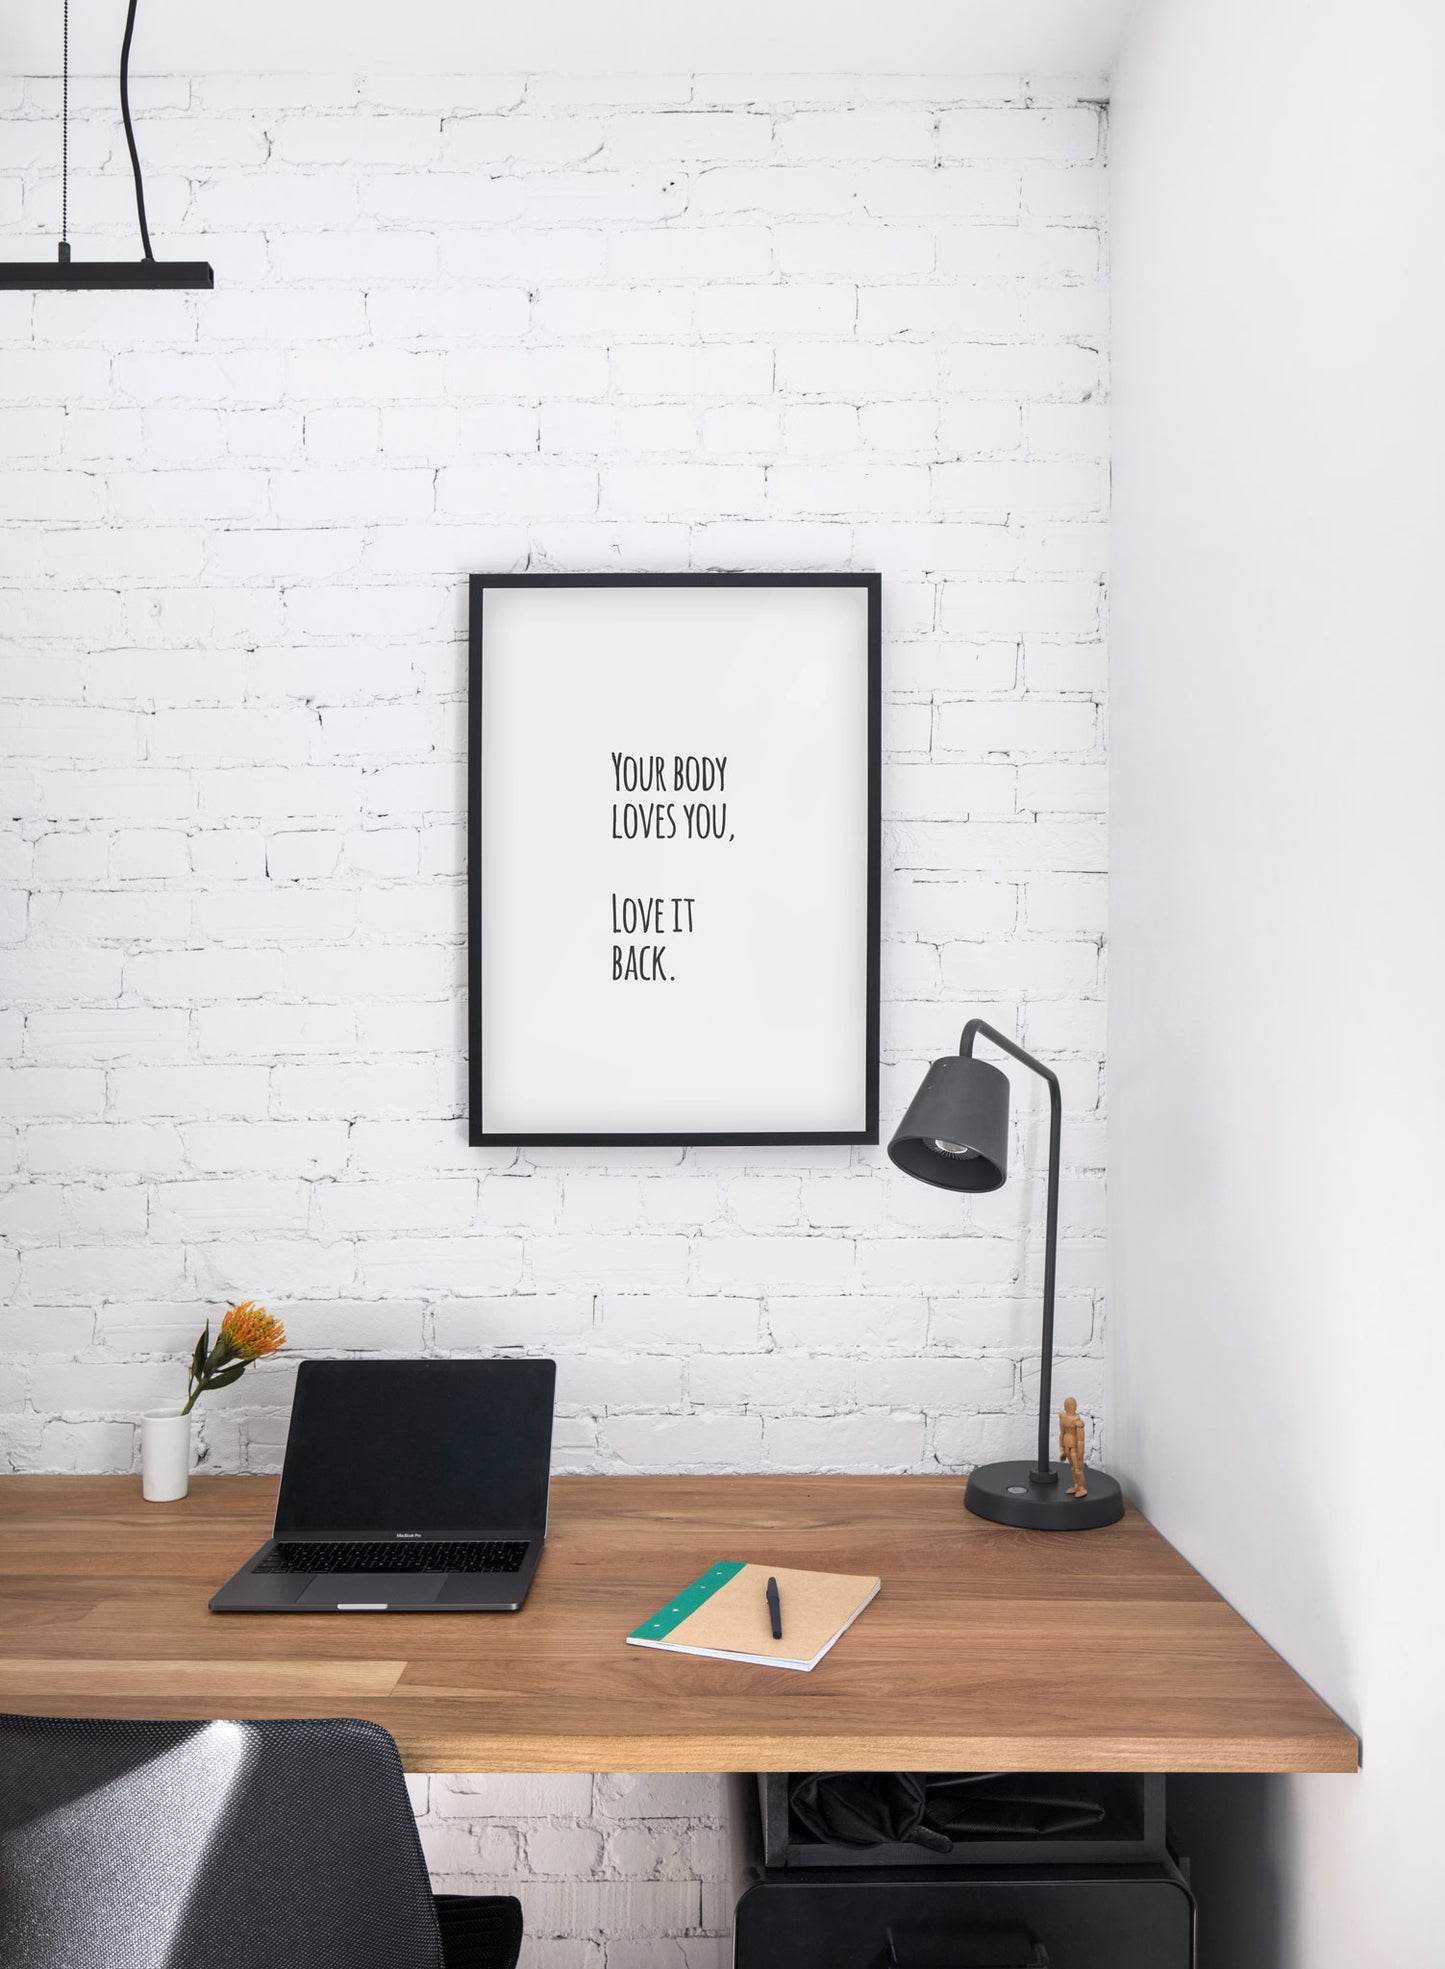 Scandinavian art print by Opposite Wall with graphic motivational Self Love quote design - Personal office